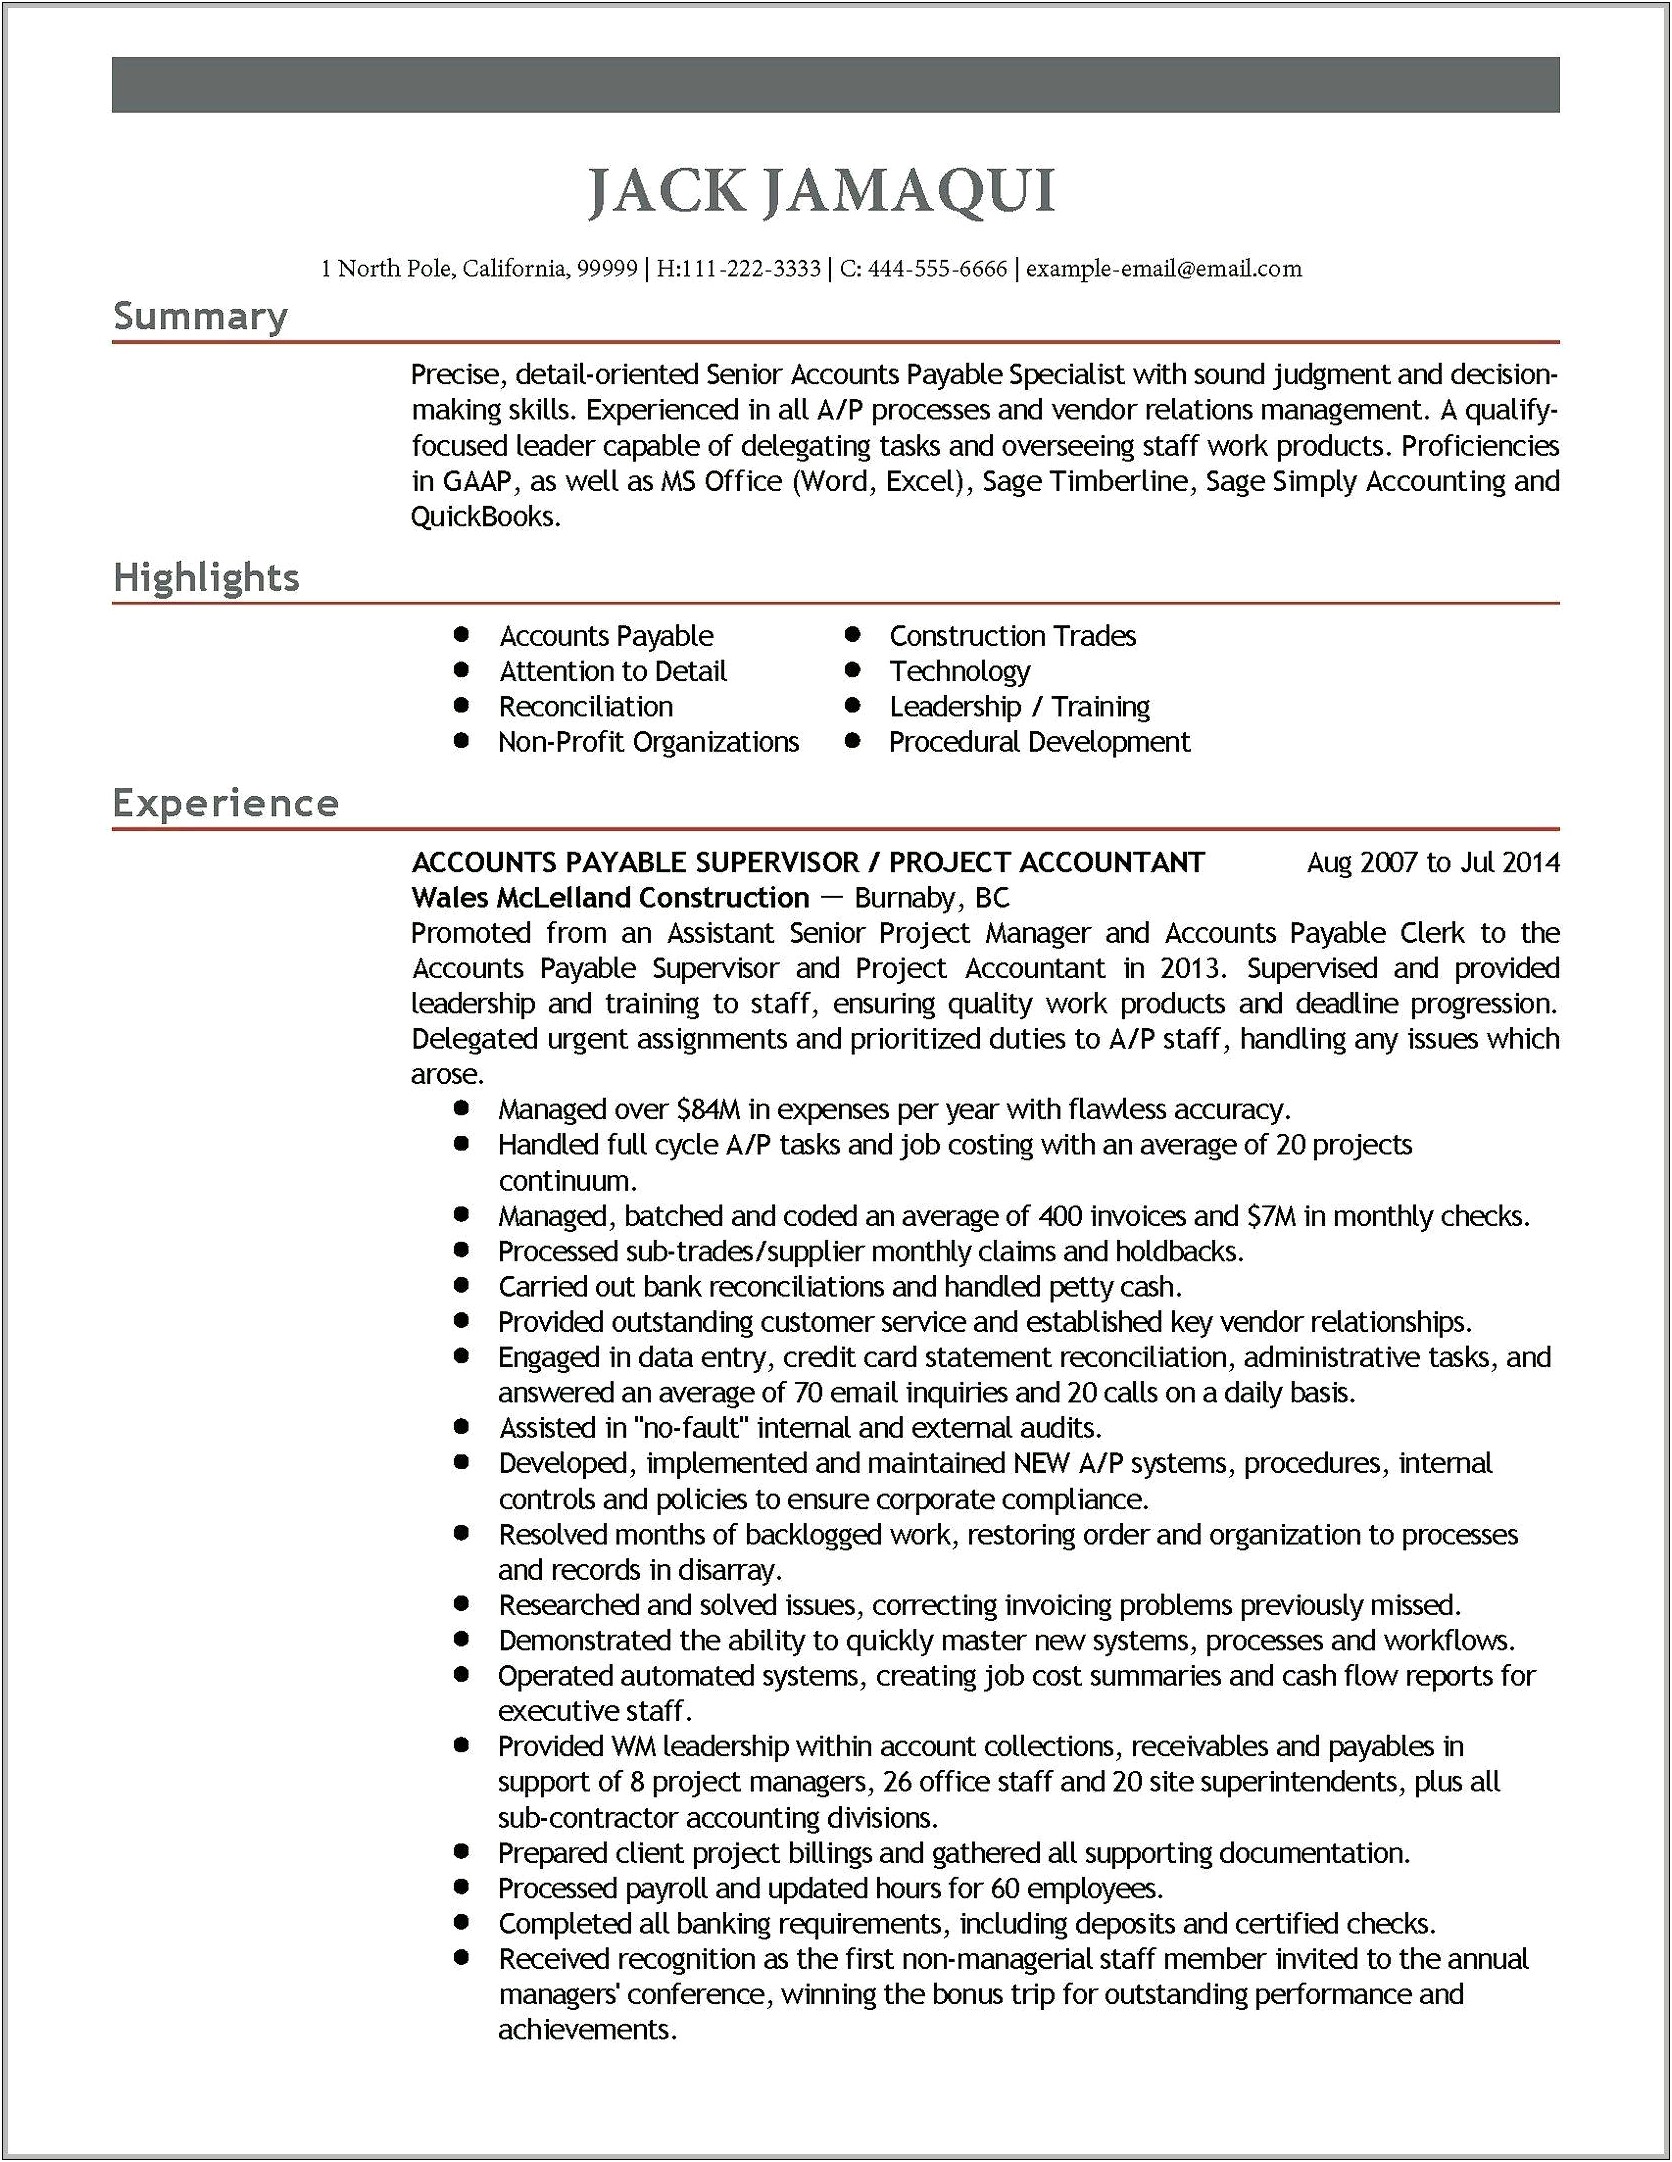 Sample Jack Of All Trades Business Resume